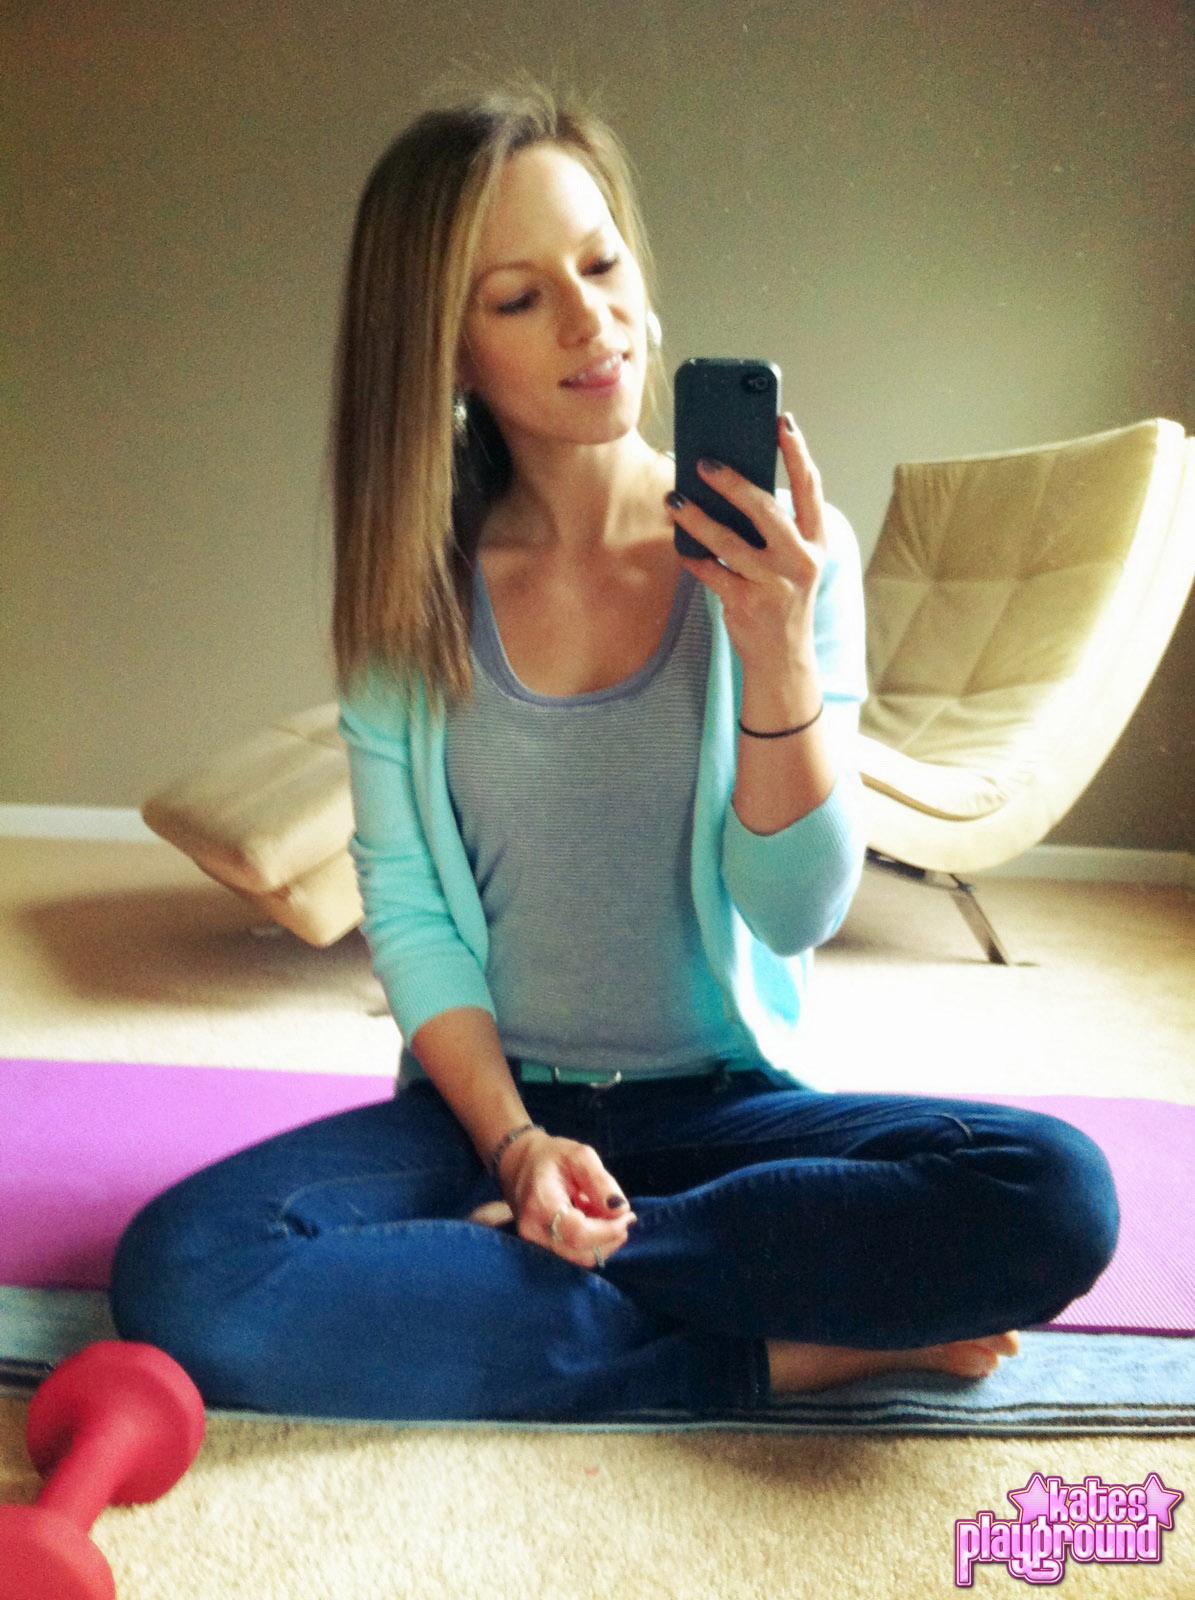 Kate feels a bit naughty at home and takes pics of herself in hot yoga pants #58060116